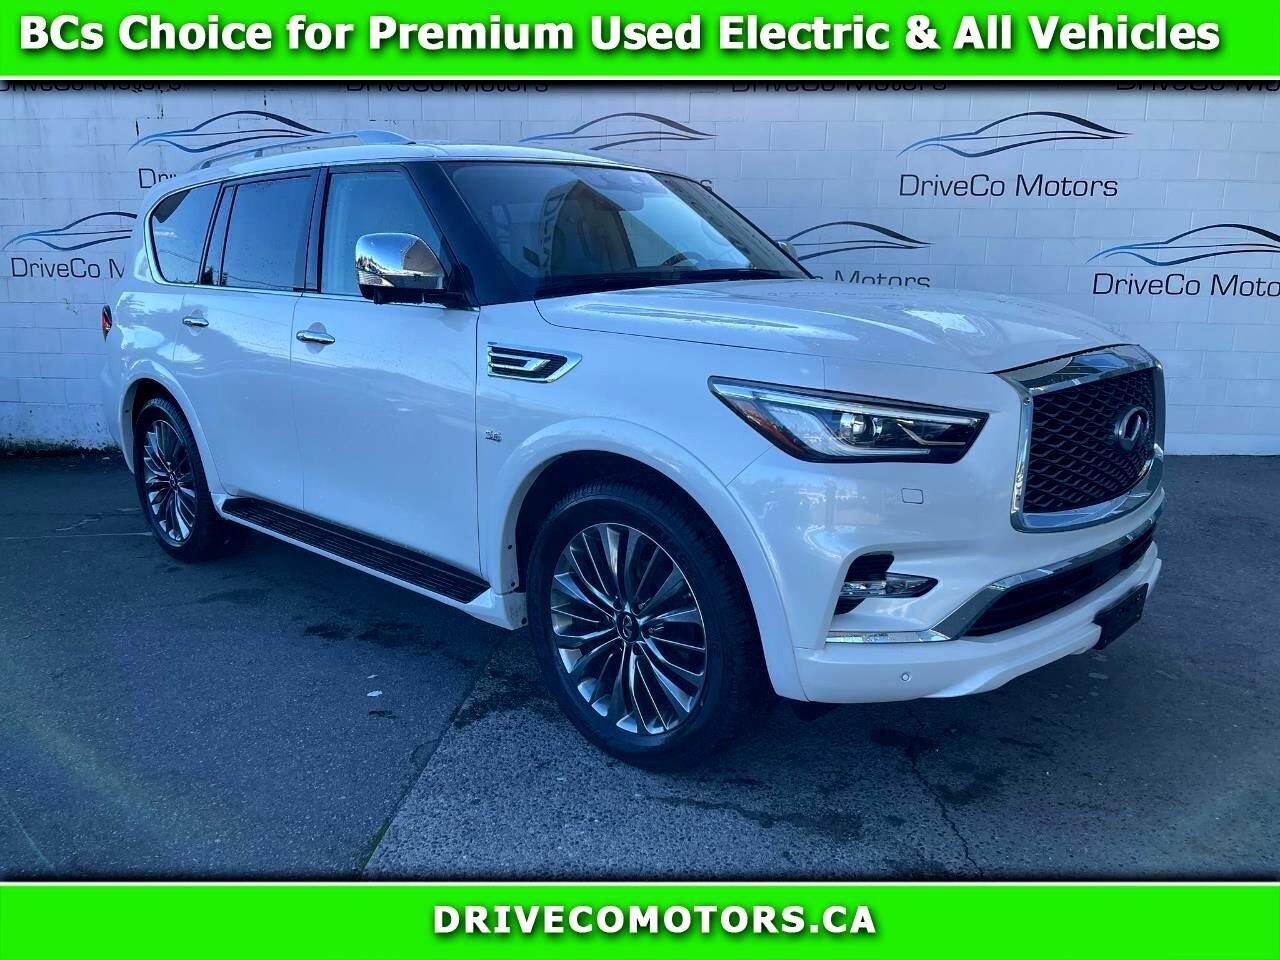 2019 Infiniti QX80 LIMITED 8 PASS REAR ENT/SCREENS IN HEADRESTS AWD